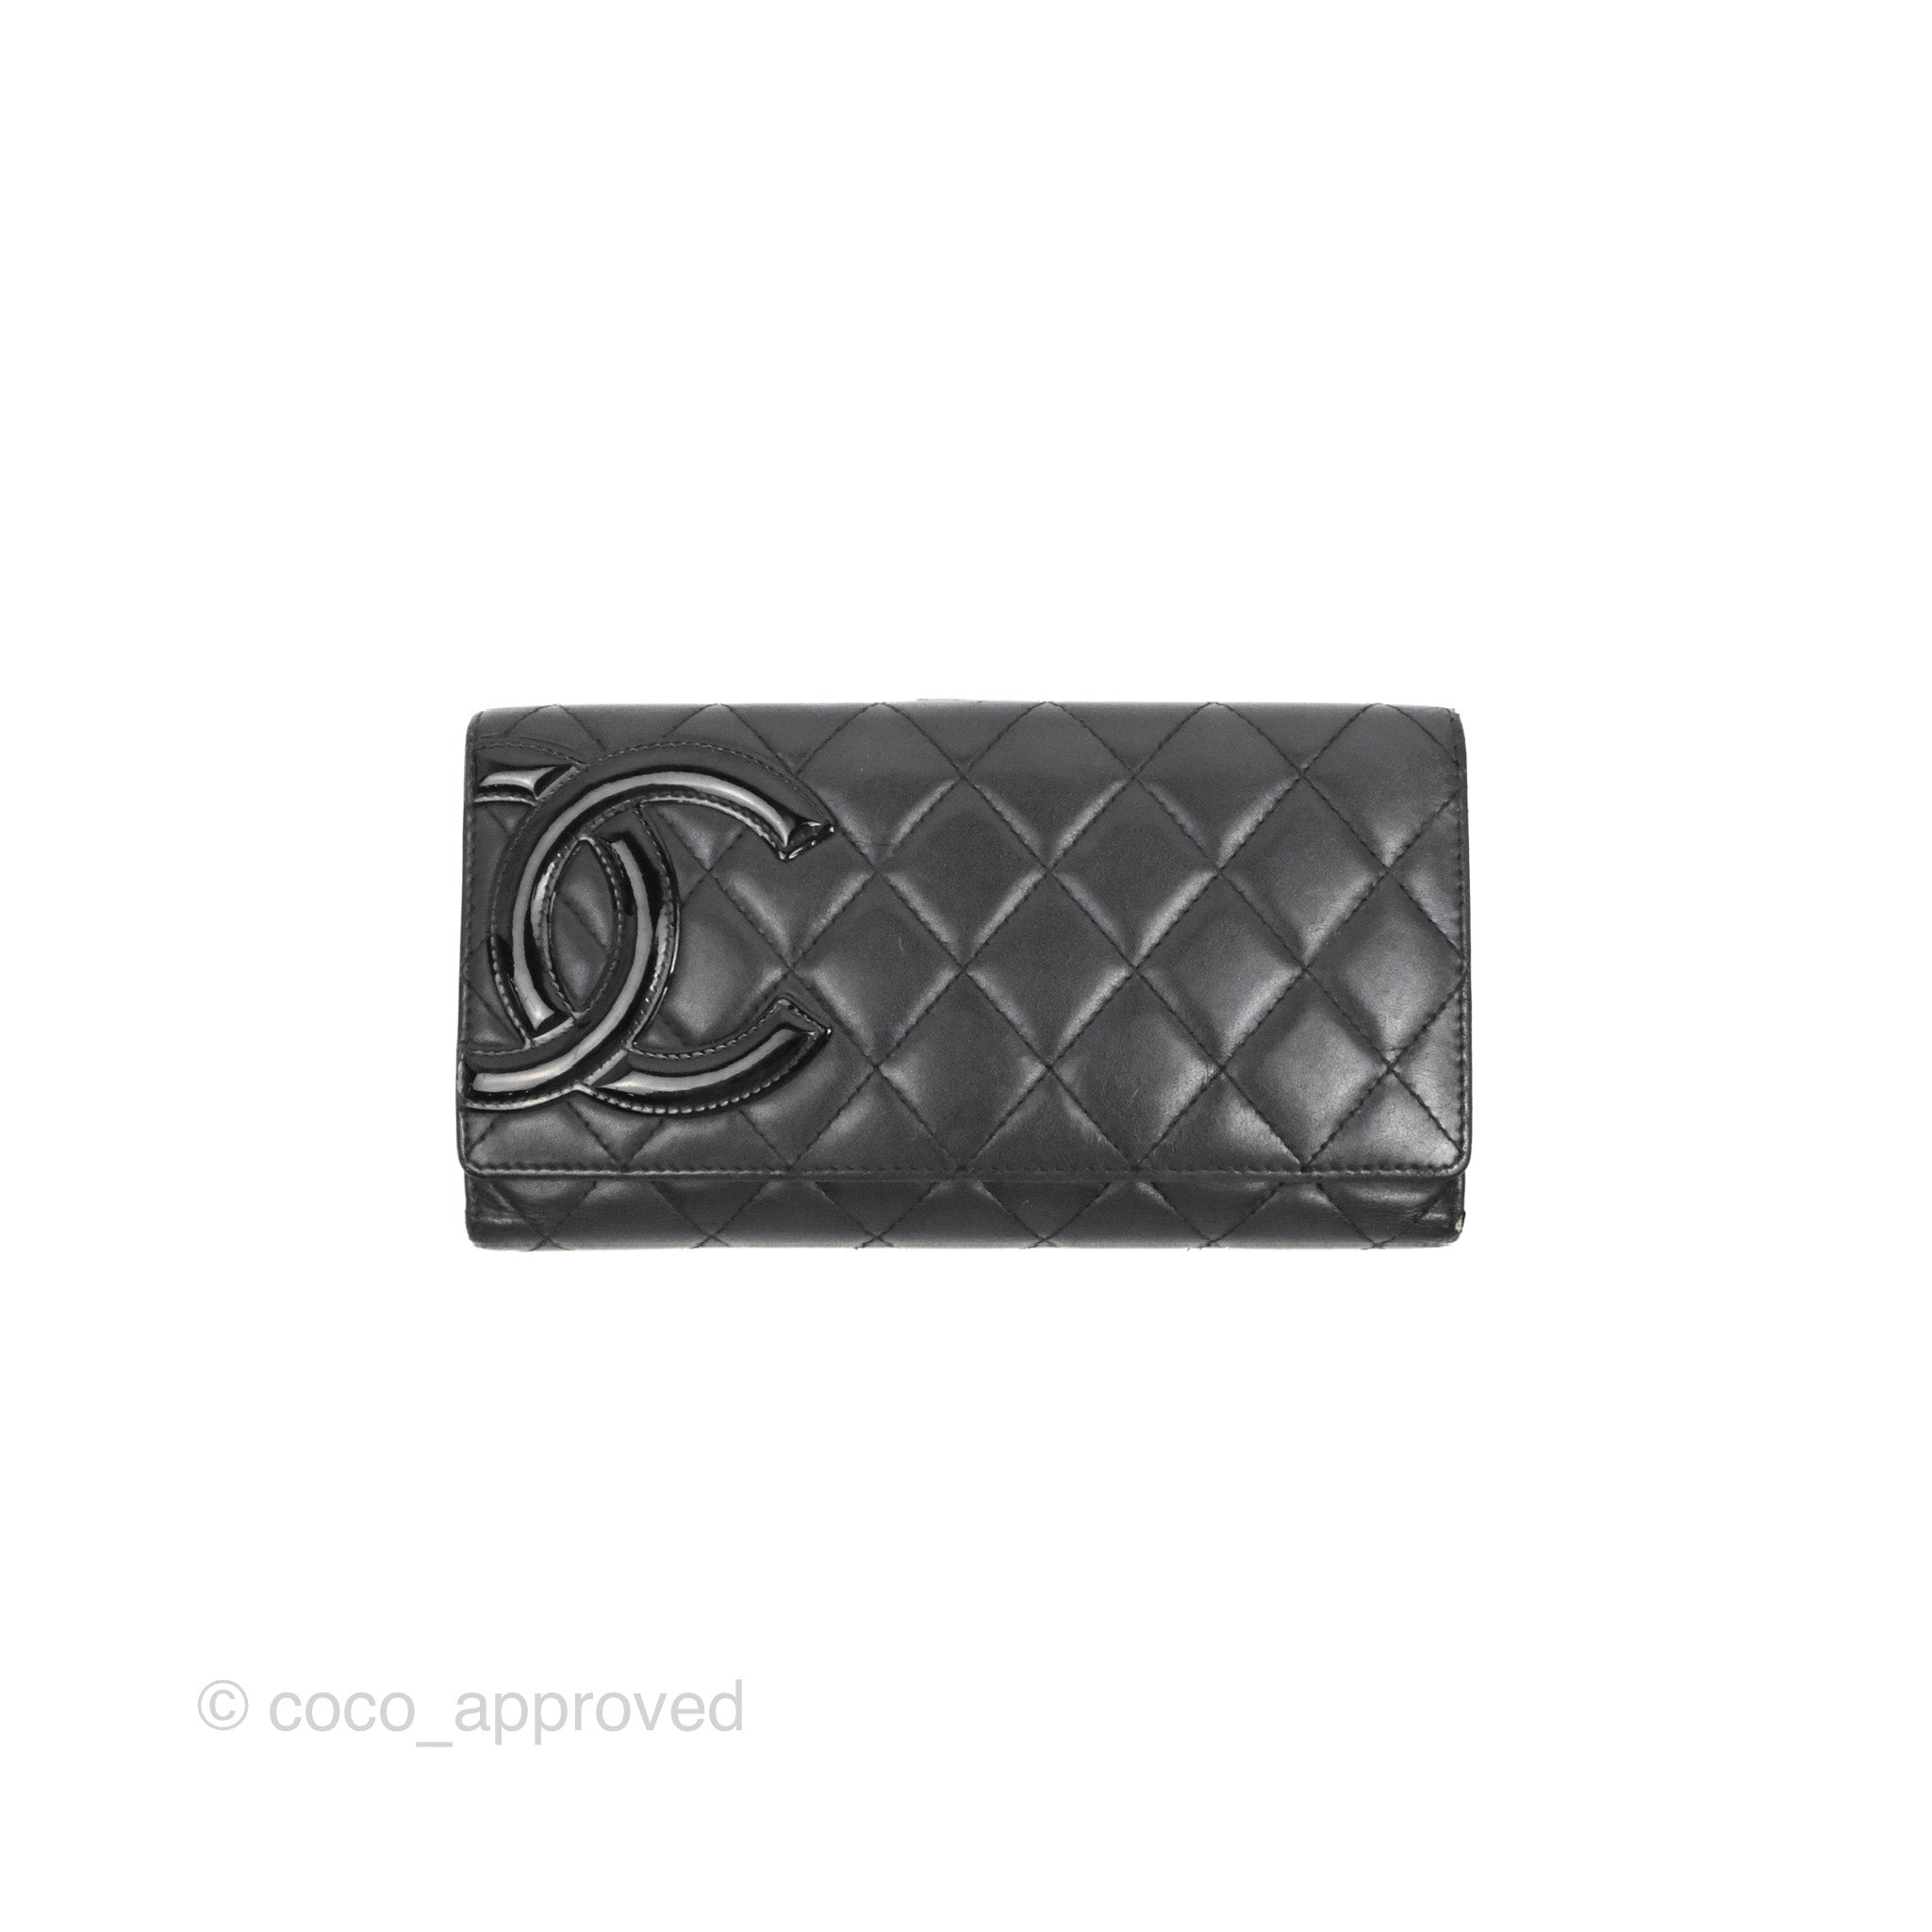 CHANEL Authentic Cambon Line Black Leather Long Wallet Zip